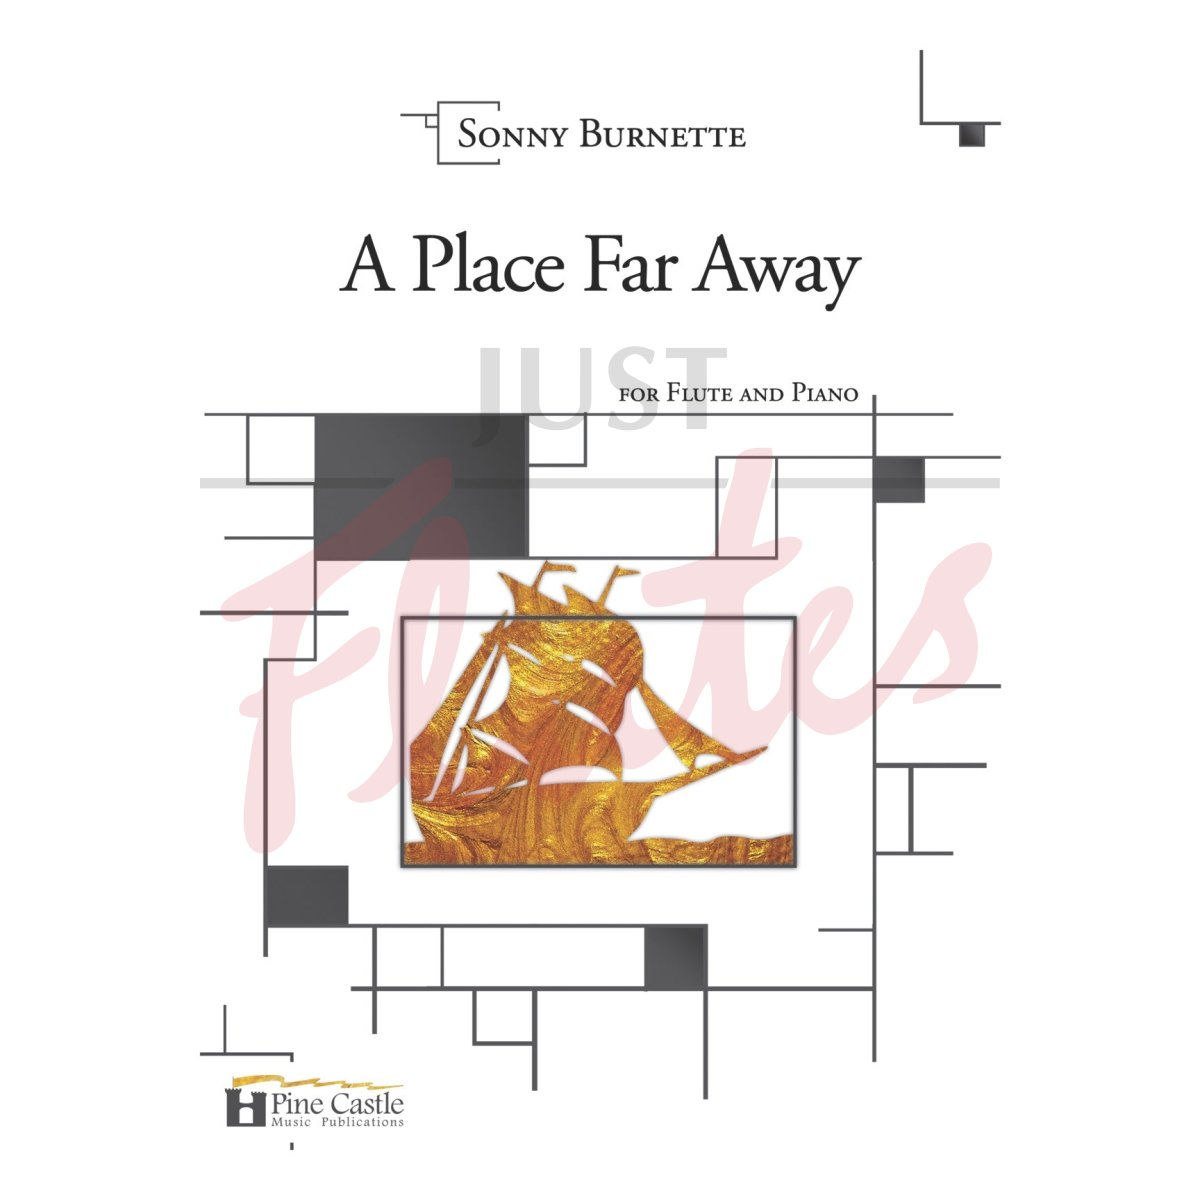 A Place Far Away for Flute and Piano